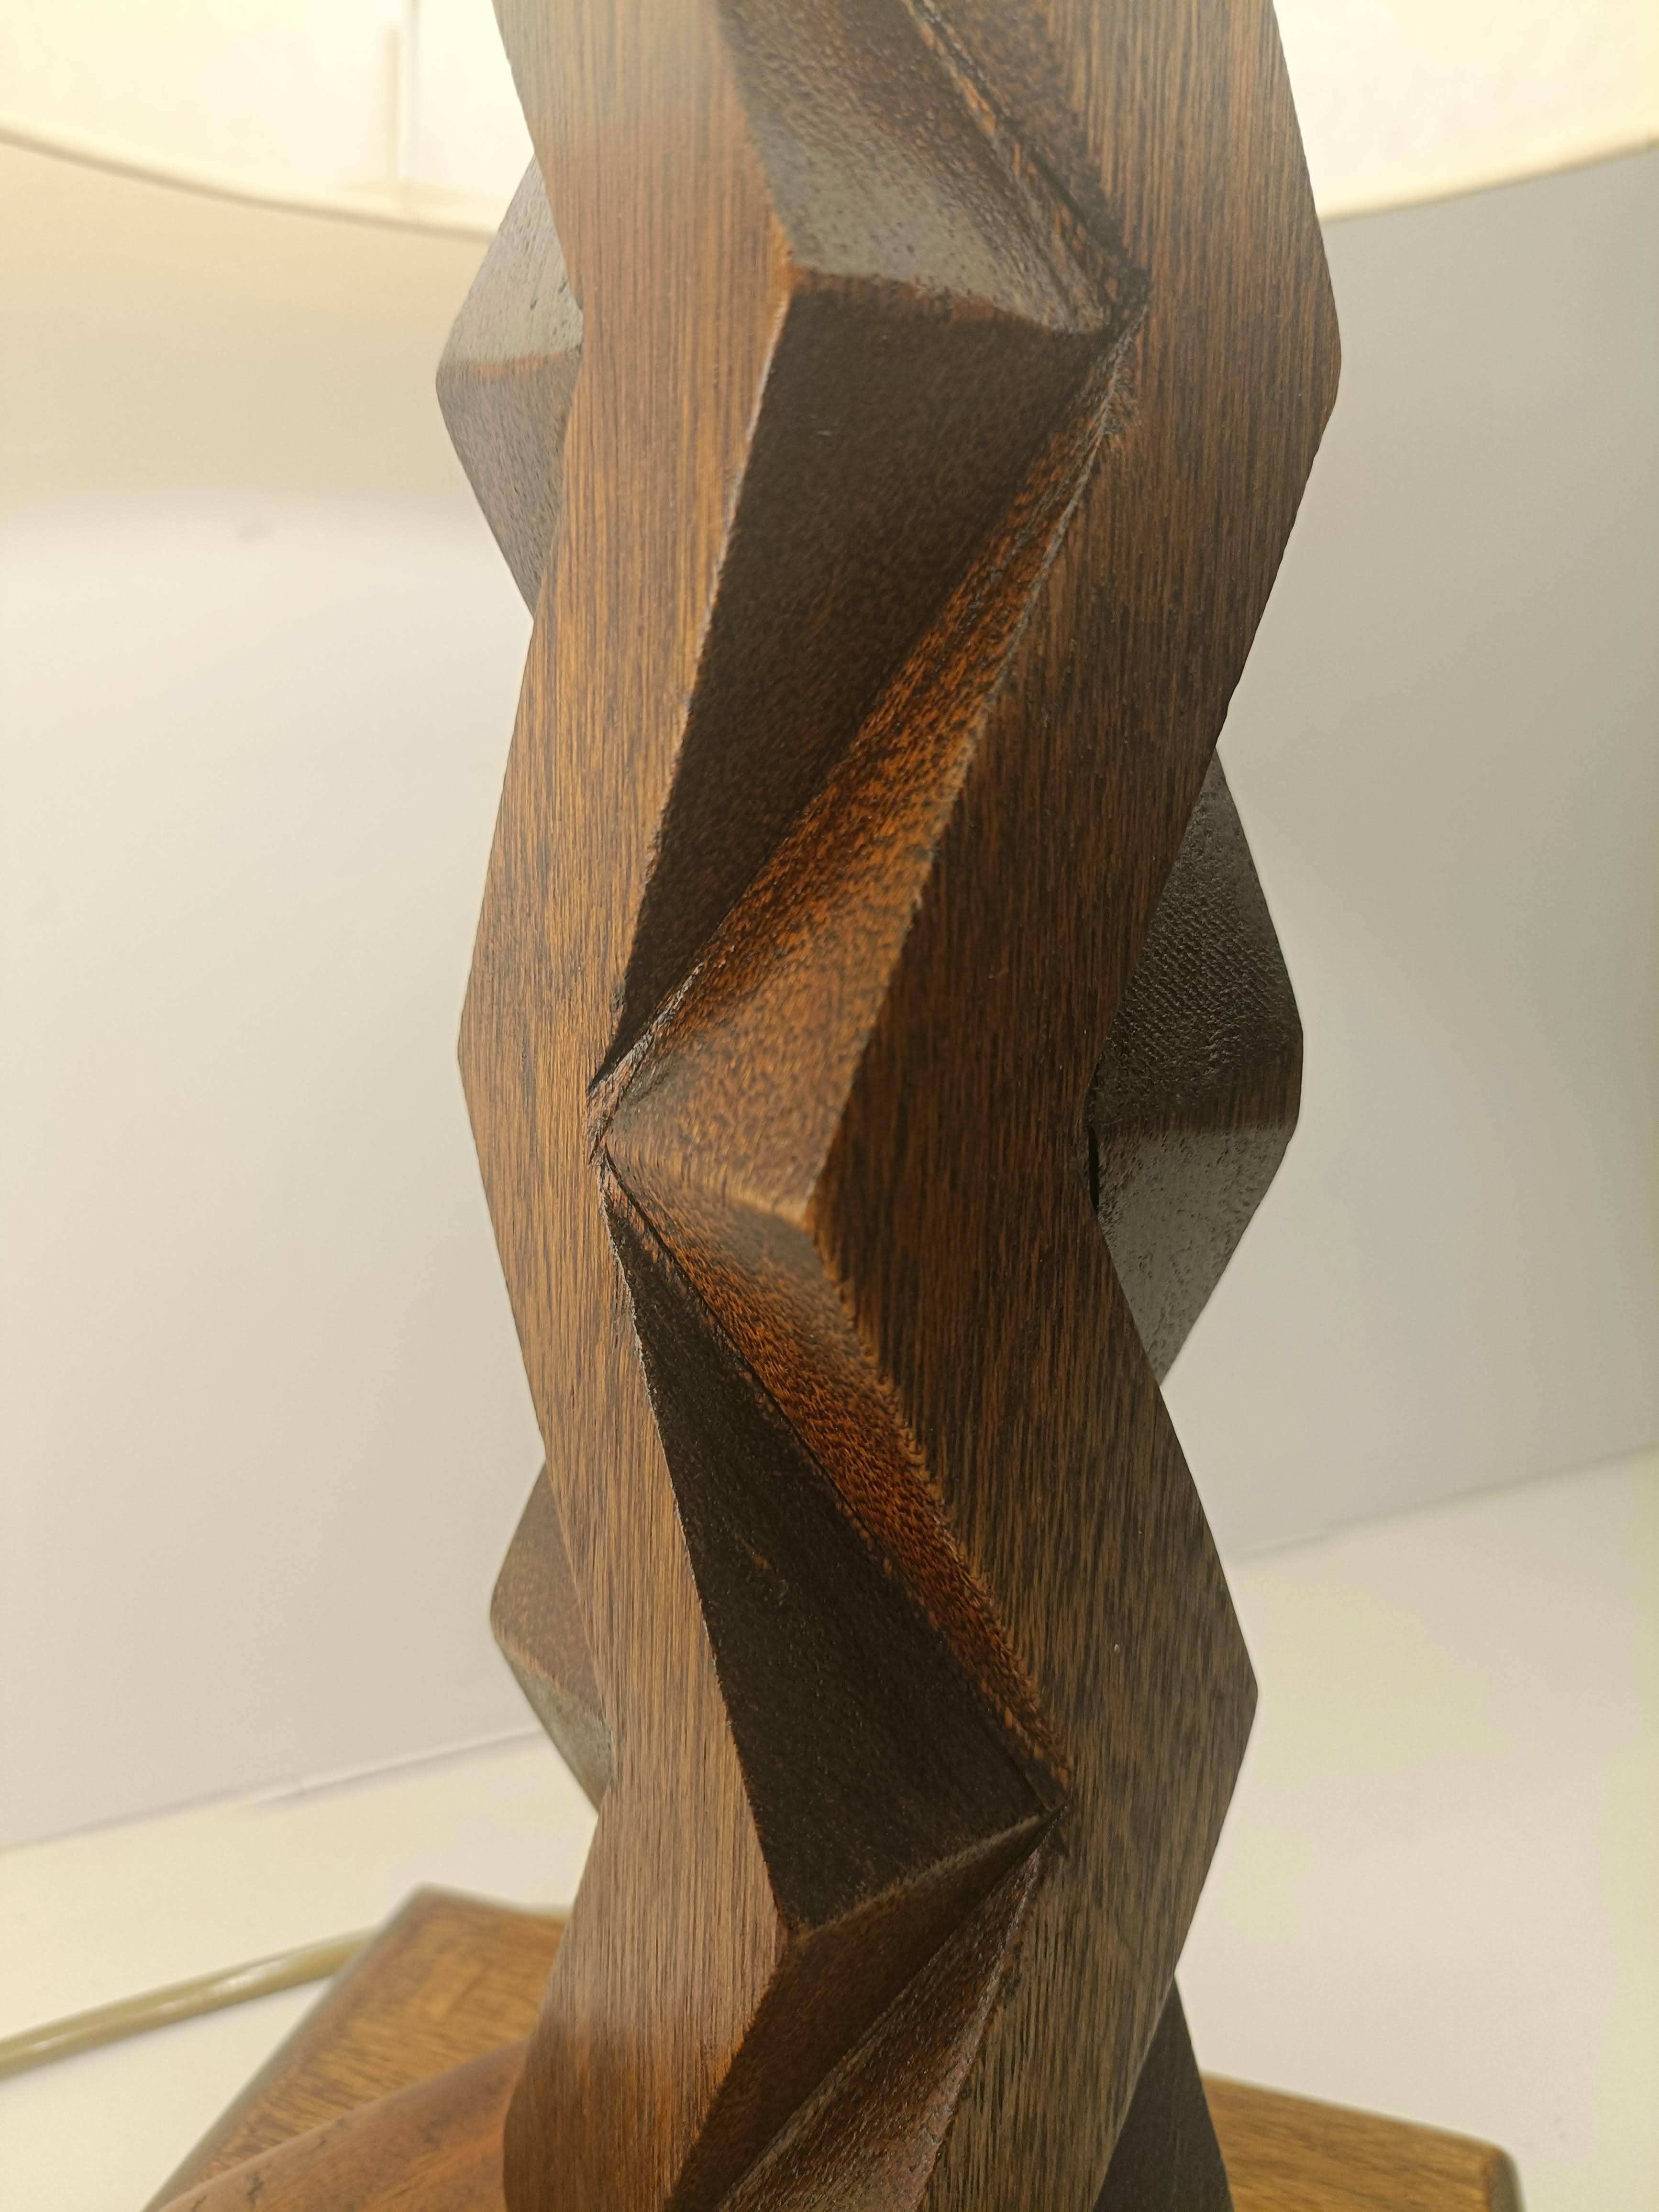 Expressionist Sculptural Brutalist French Wood Lamp circa 1950 like Constantin Brancusi For Sale